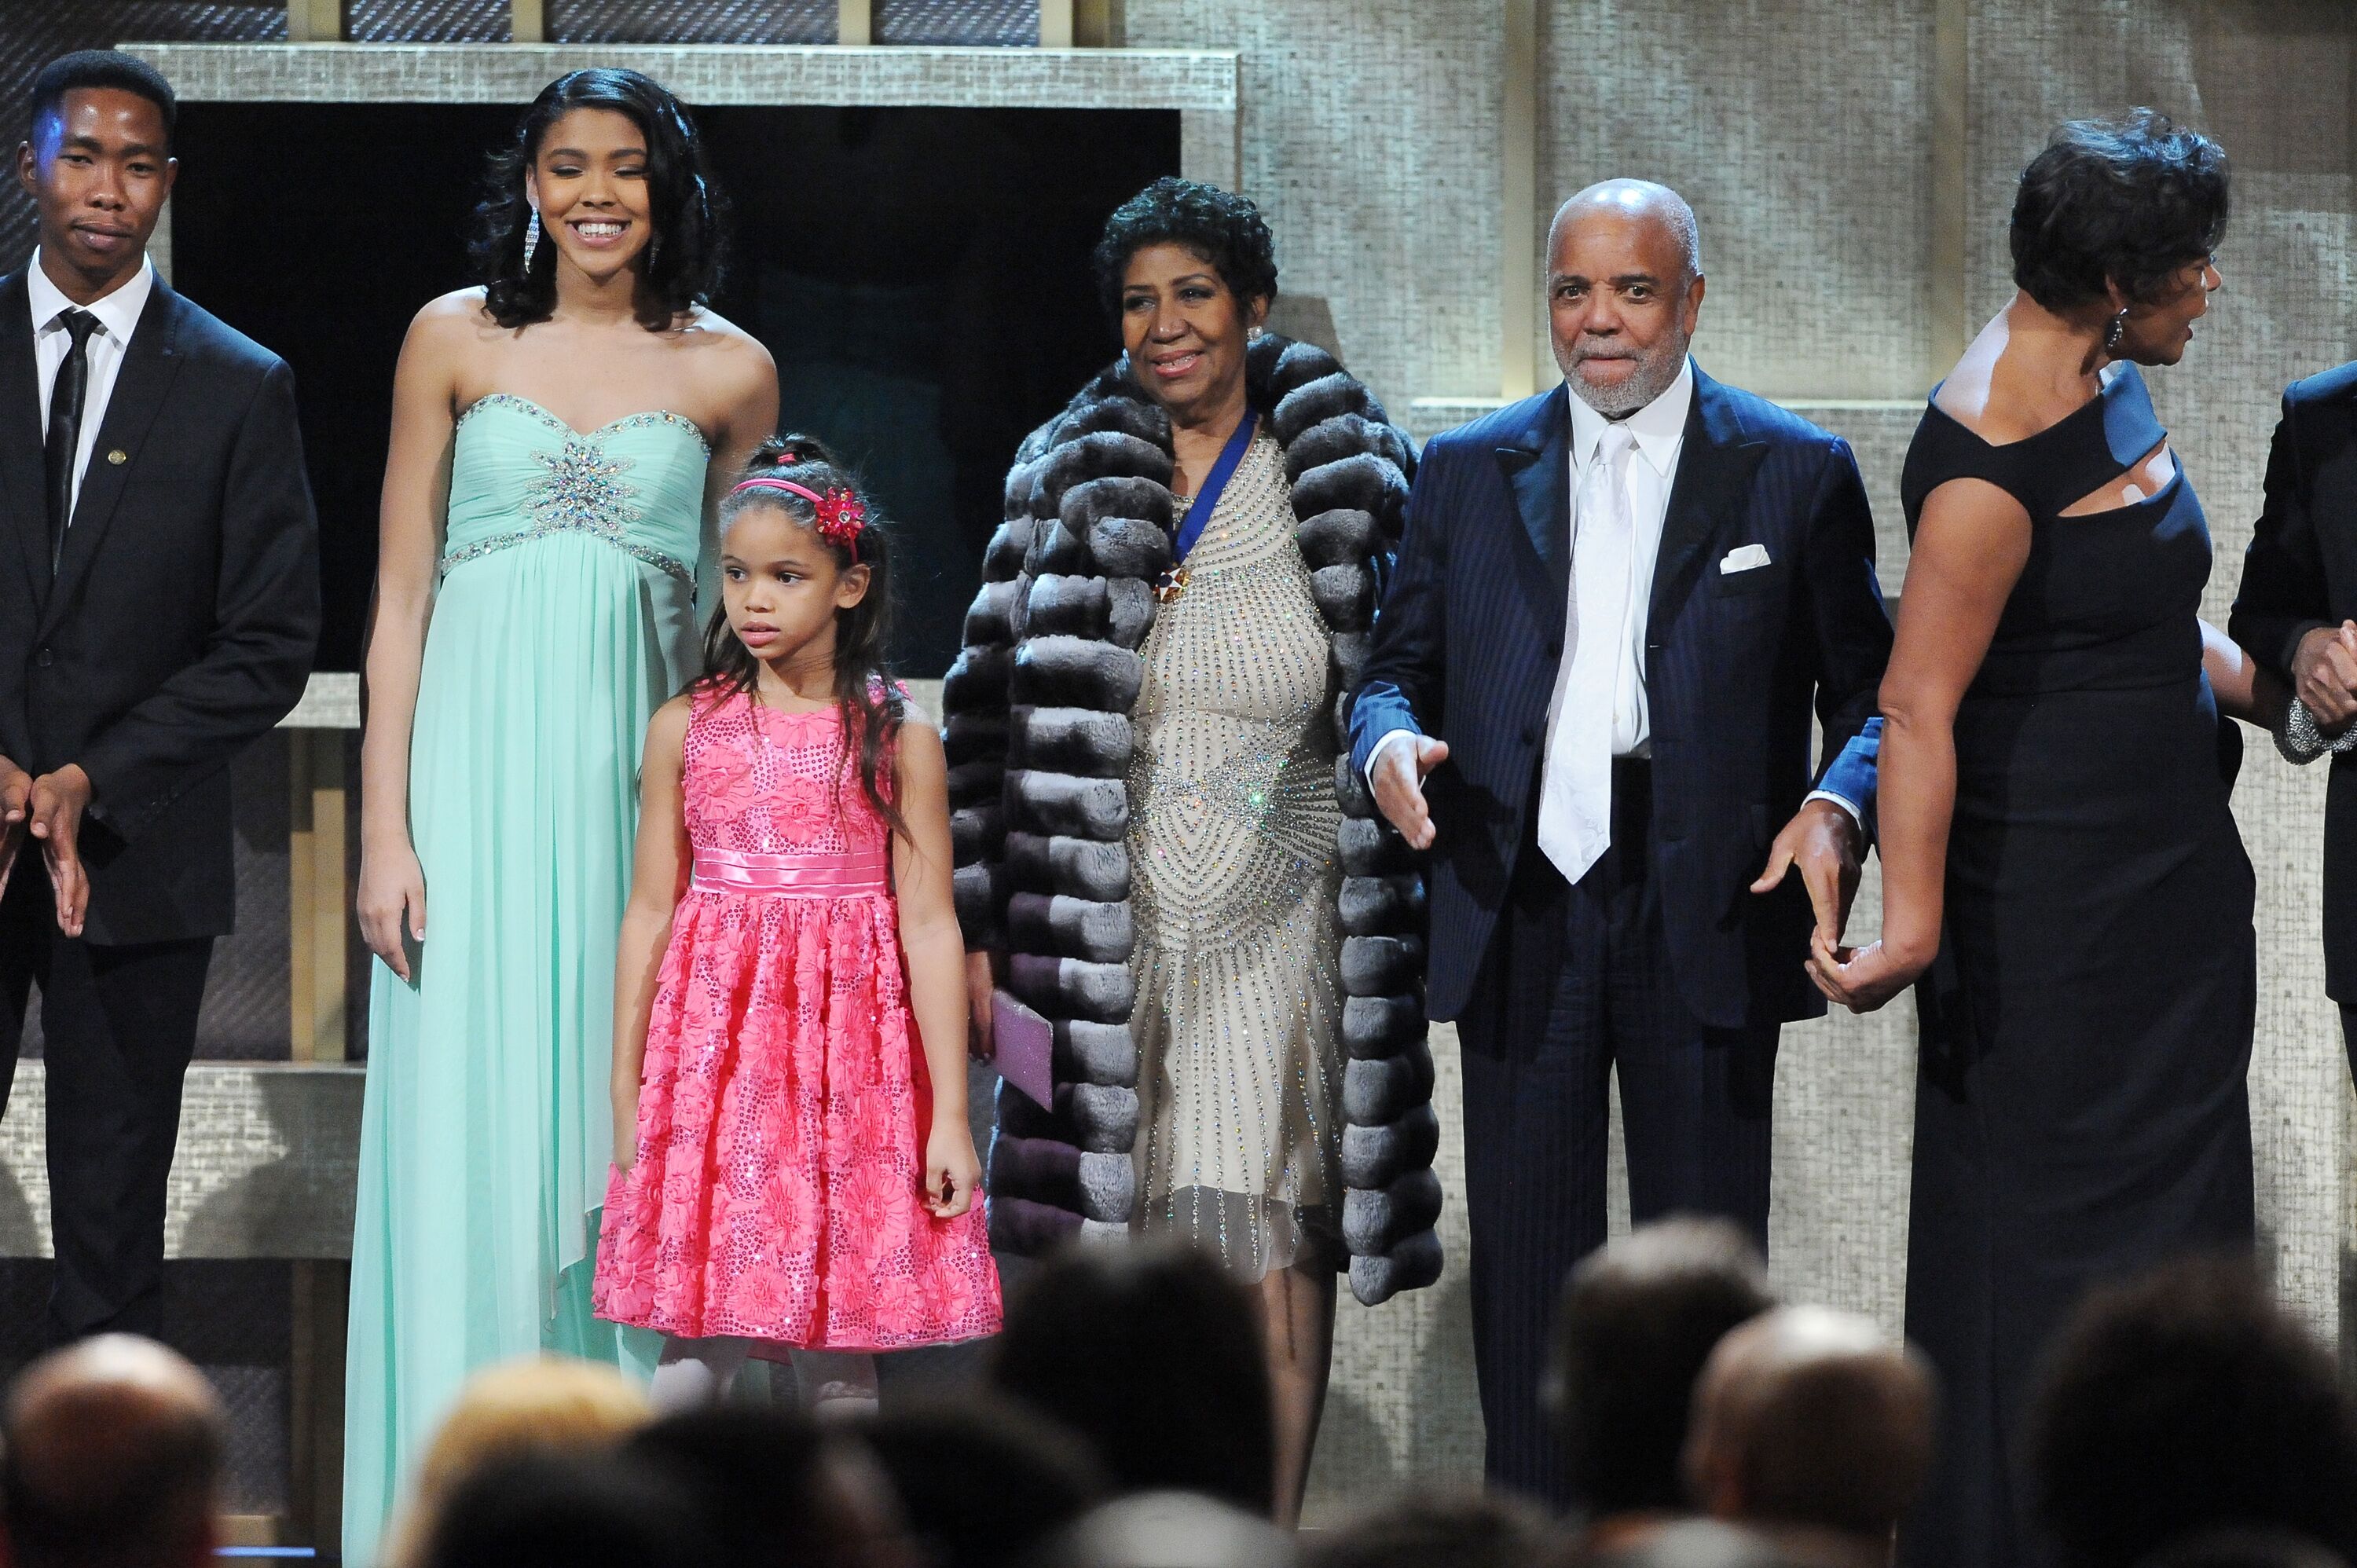 Aretha Franklin on-stage with her family | Source: Getty Images